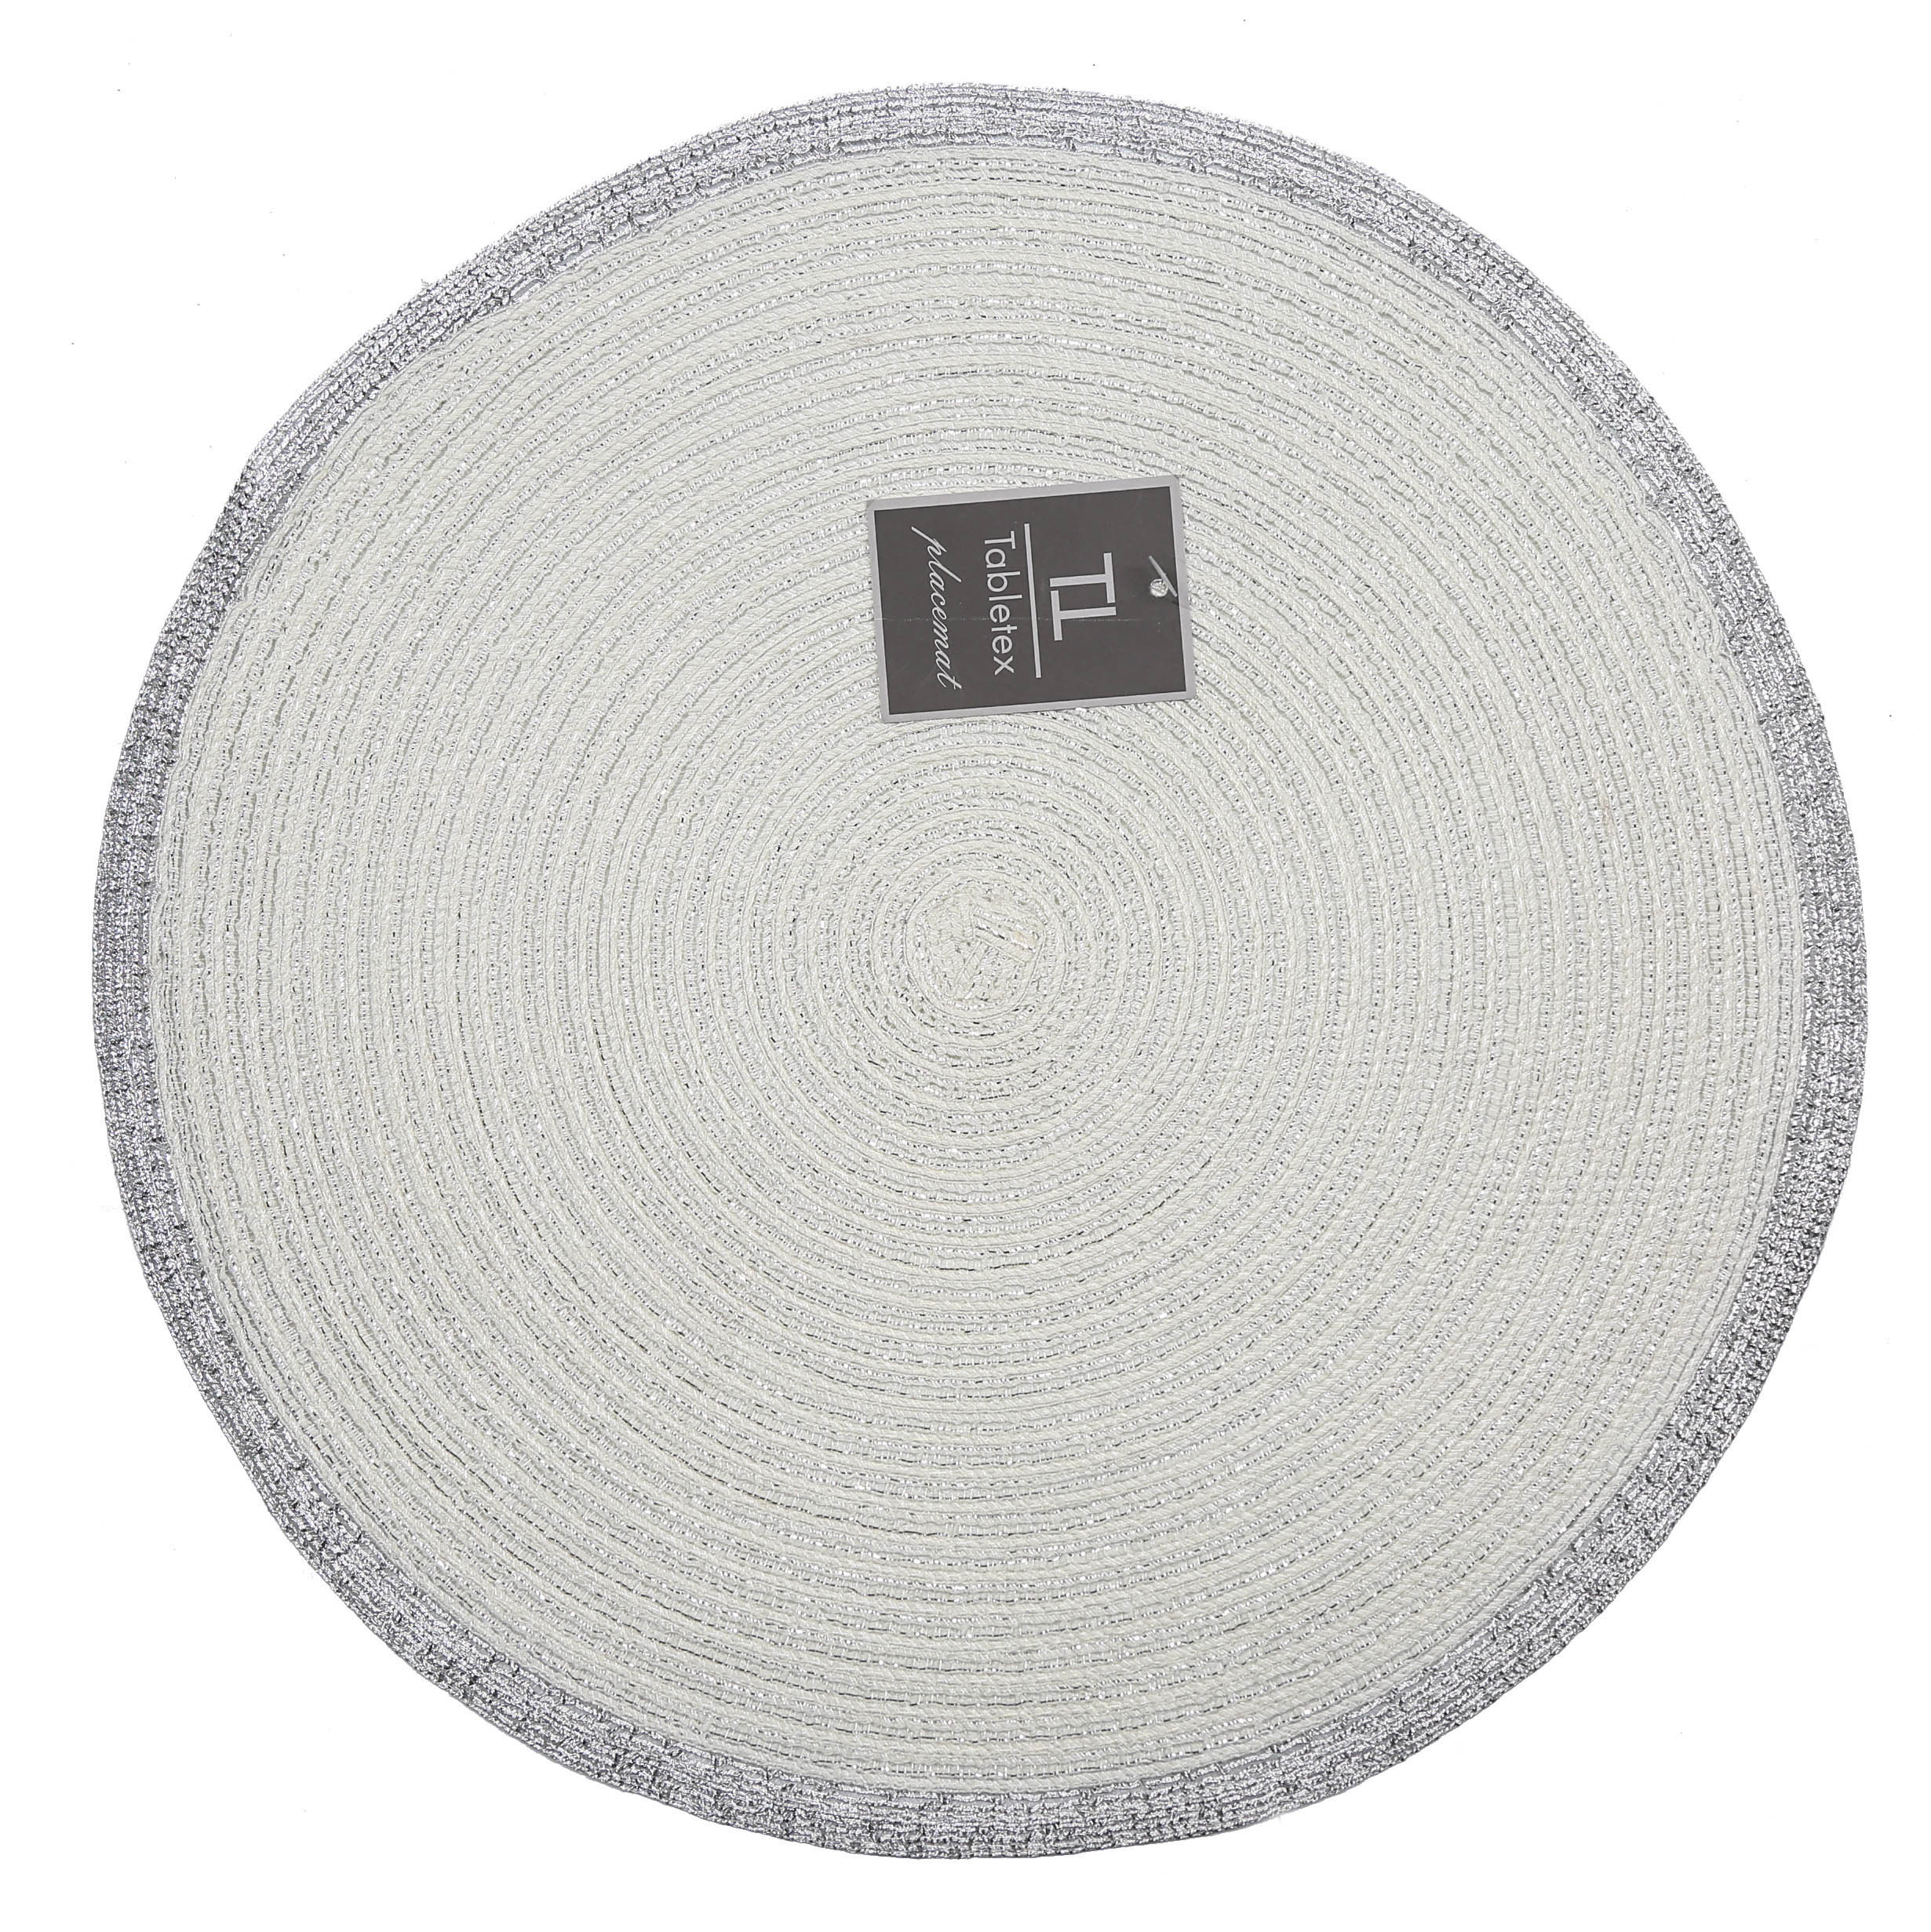 Tabletex cheap anti-slip polyester cotton PET dining table place mats multi color round new design modern placemat